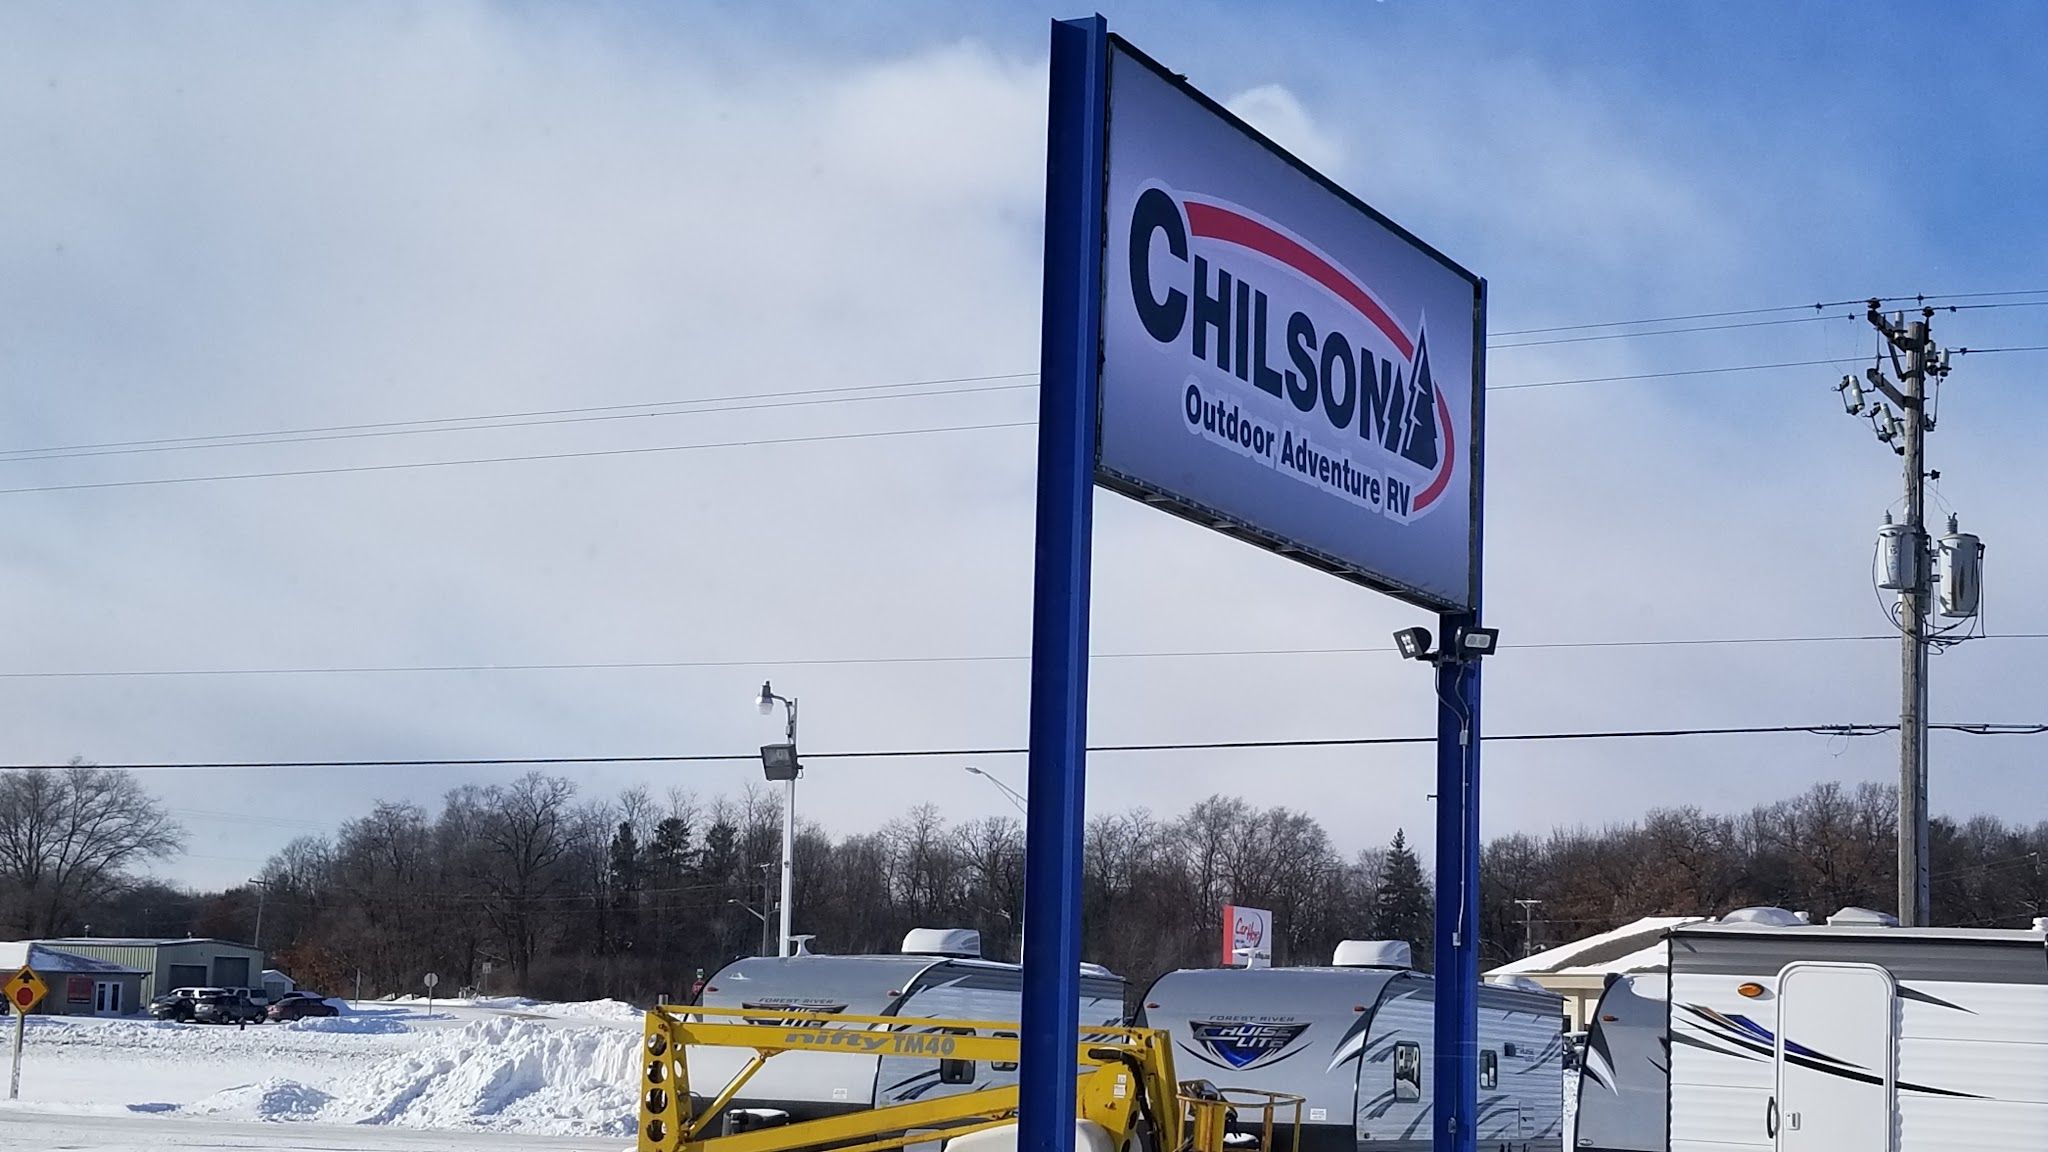 Services & Products Chilson Outdoor Adventure RV in Chippewa Falls WI